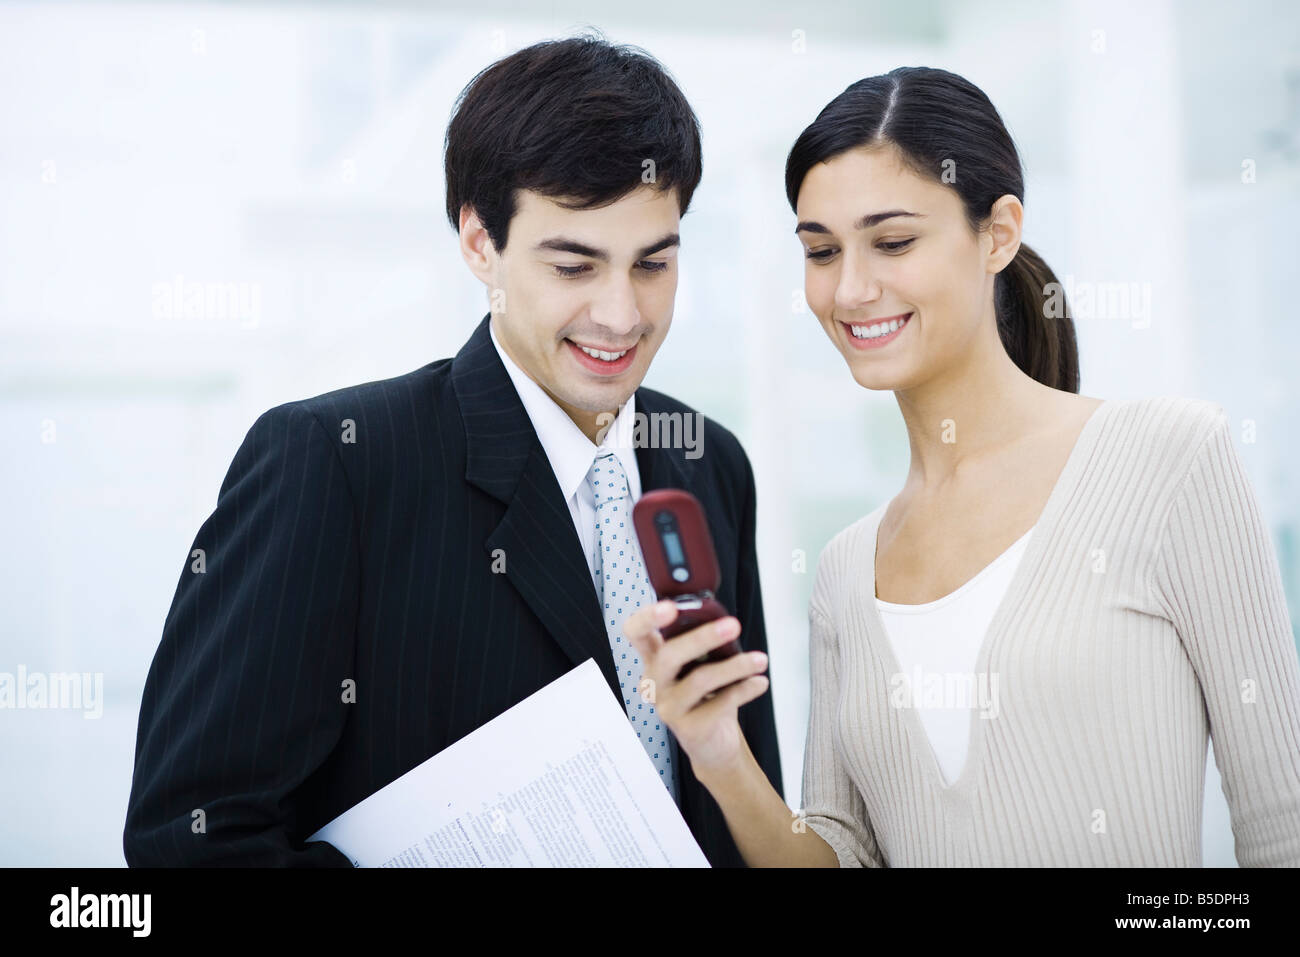 Colleagues looking at cell phone together, smiling Stock Photo